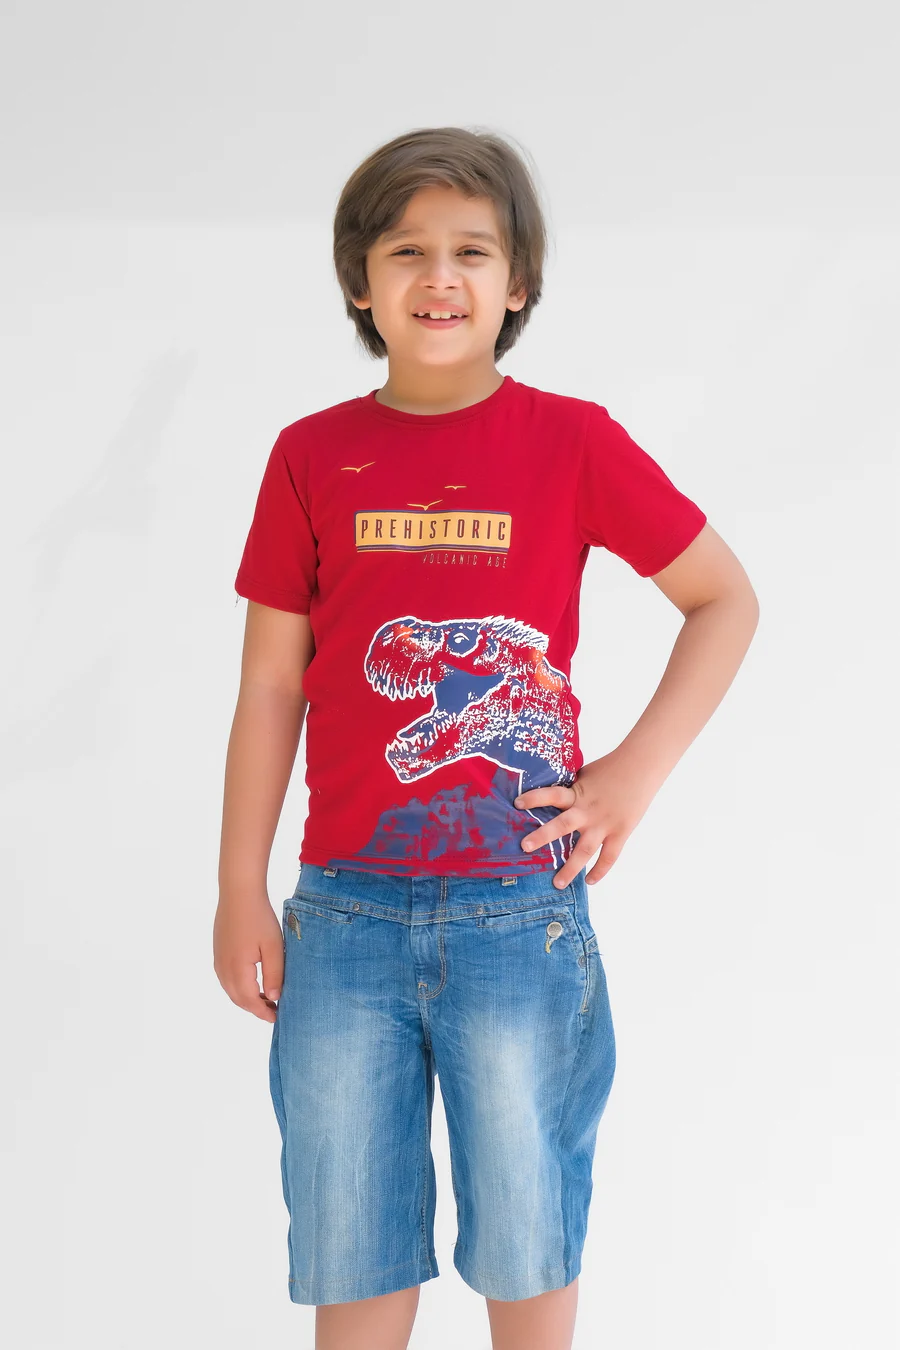 Prehistoric Volcanic Age - Half Sleeves T-Shirts For Kids - Maroon